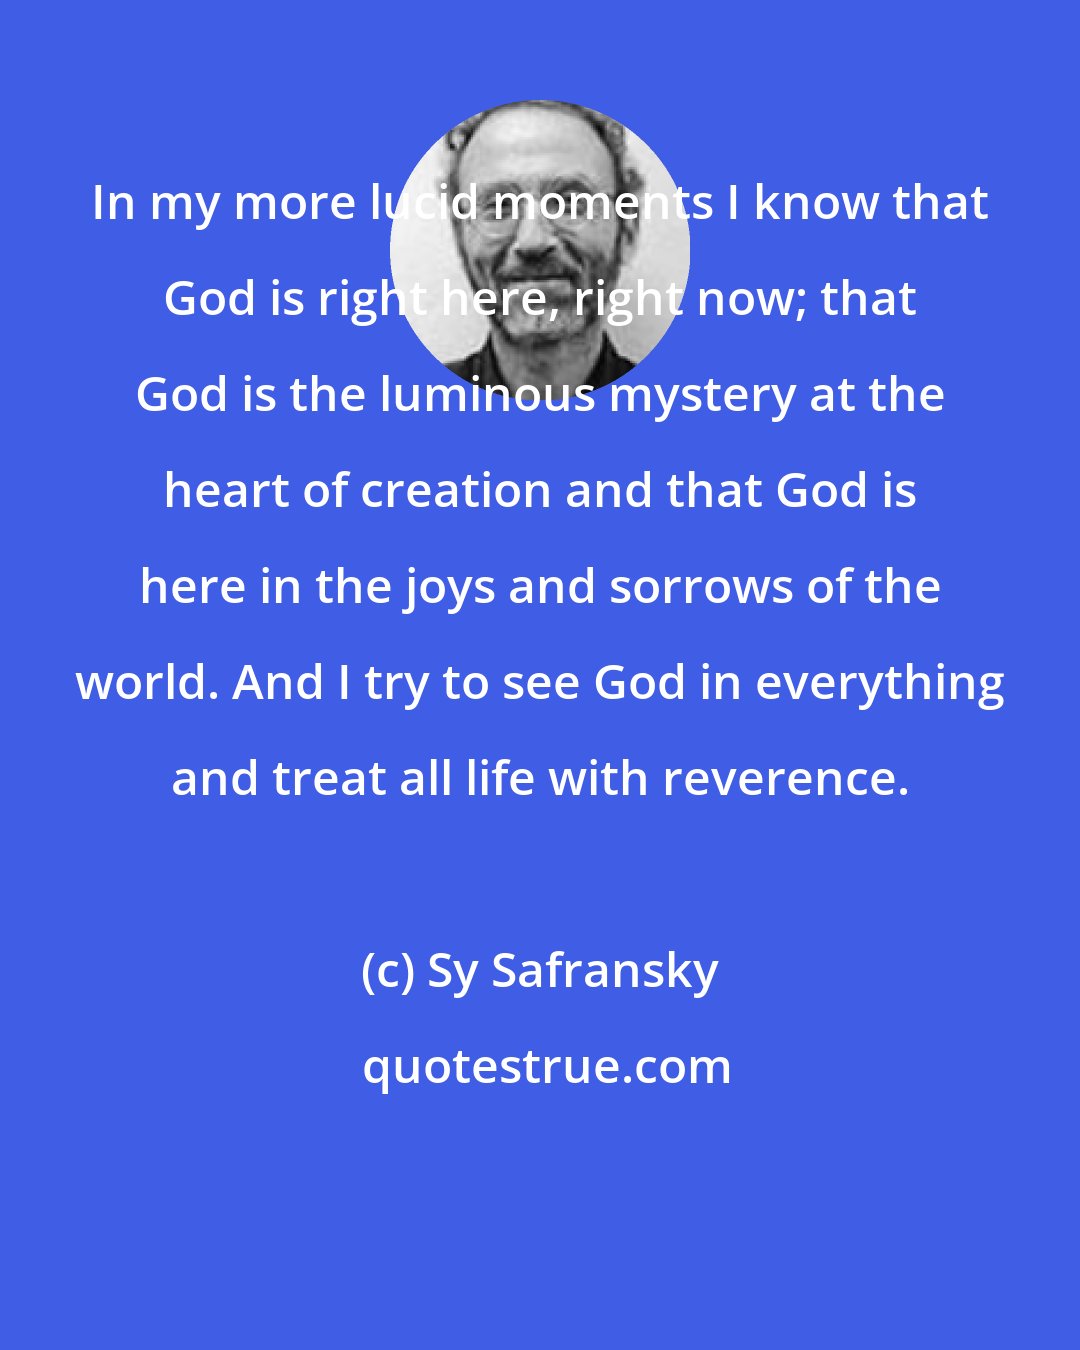 Sy Safransky: In my more lucid moments I know that God is right here, right now; that God is the luminous mystery at the heart of creation and that God is here in the joys and sorrows of the world. And I try to see God in everything and treat all life with reverence.